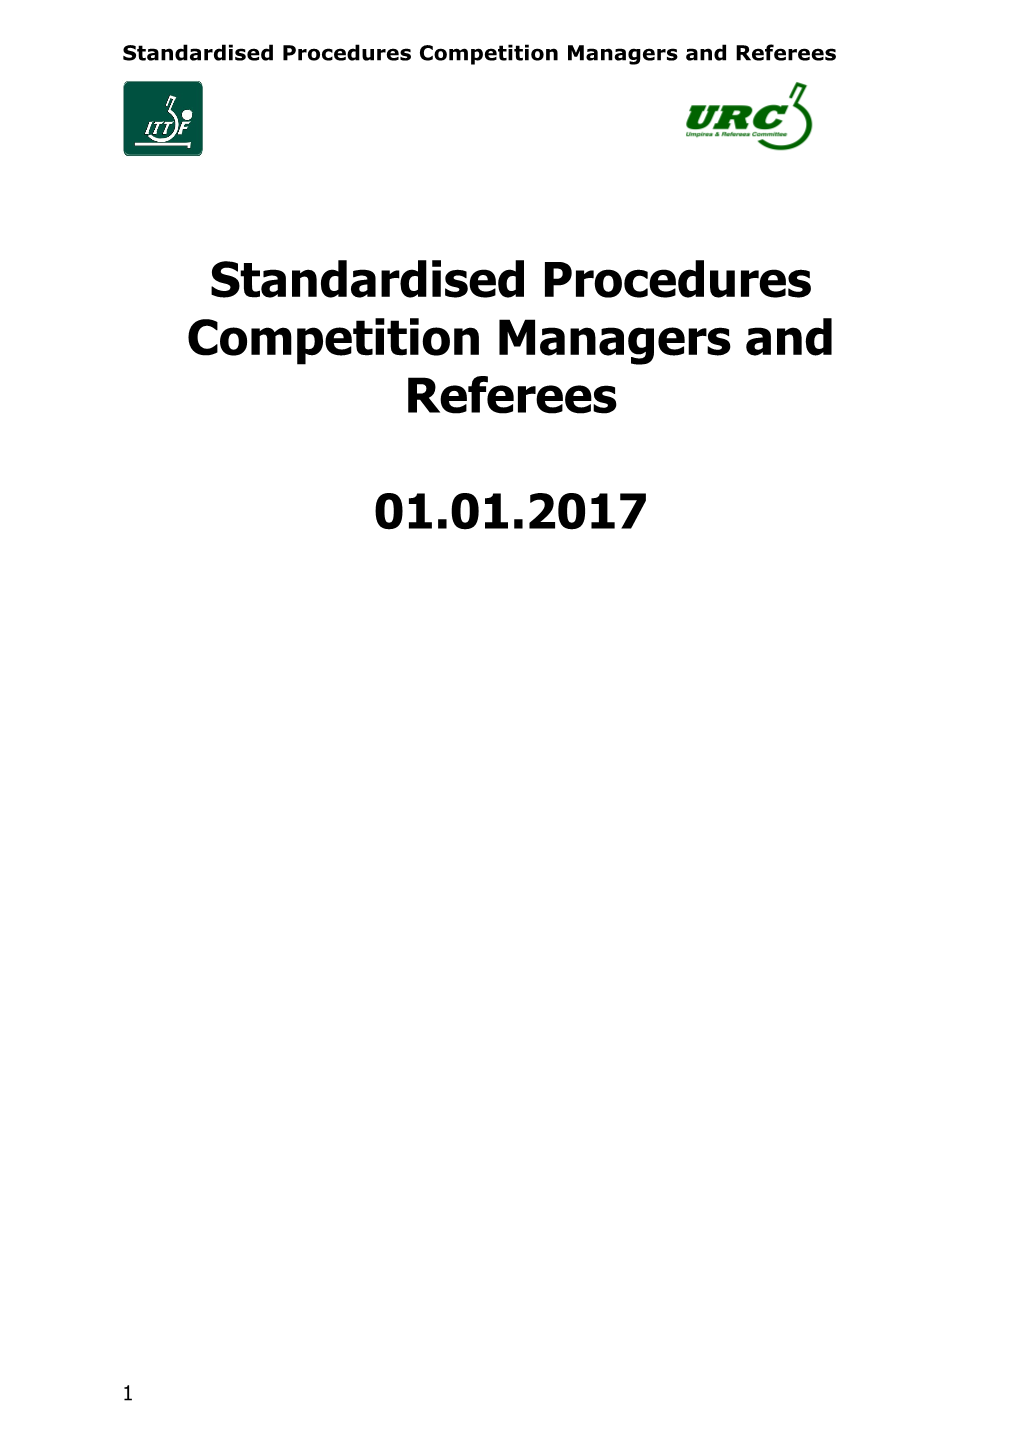 Standardised Procedures Competition Managers and Referees